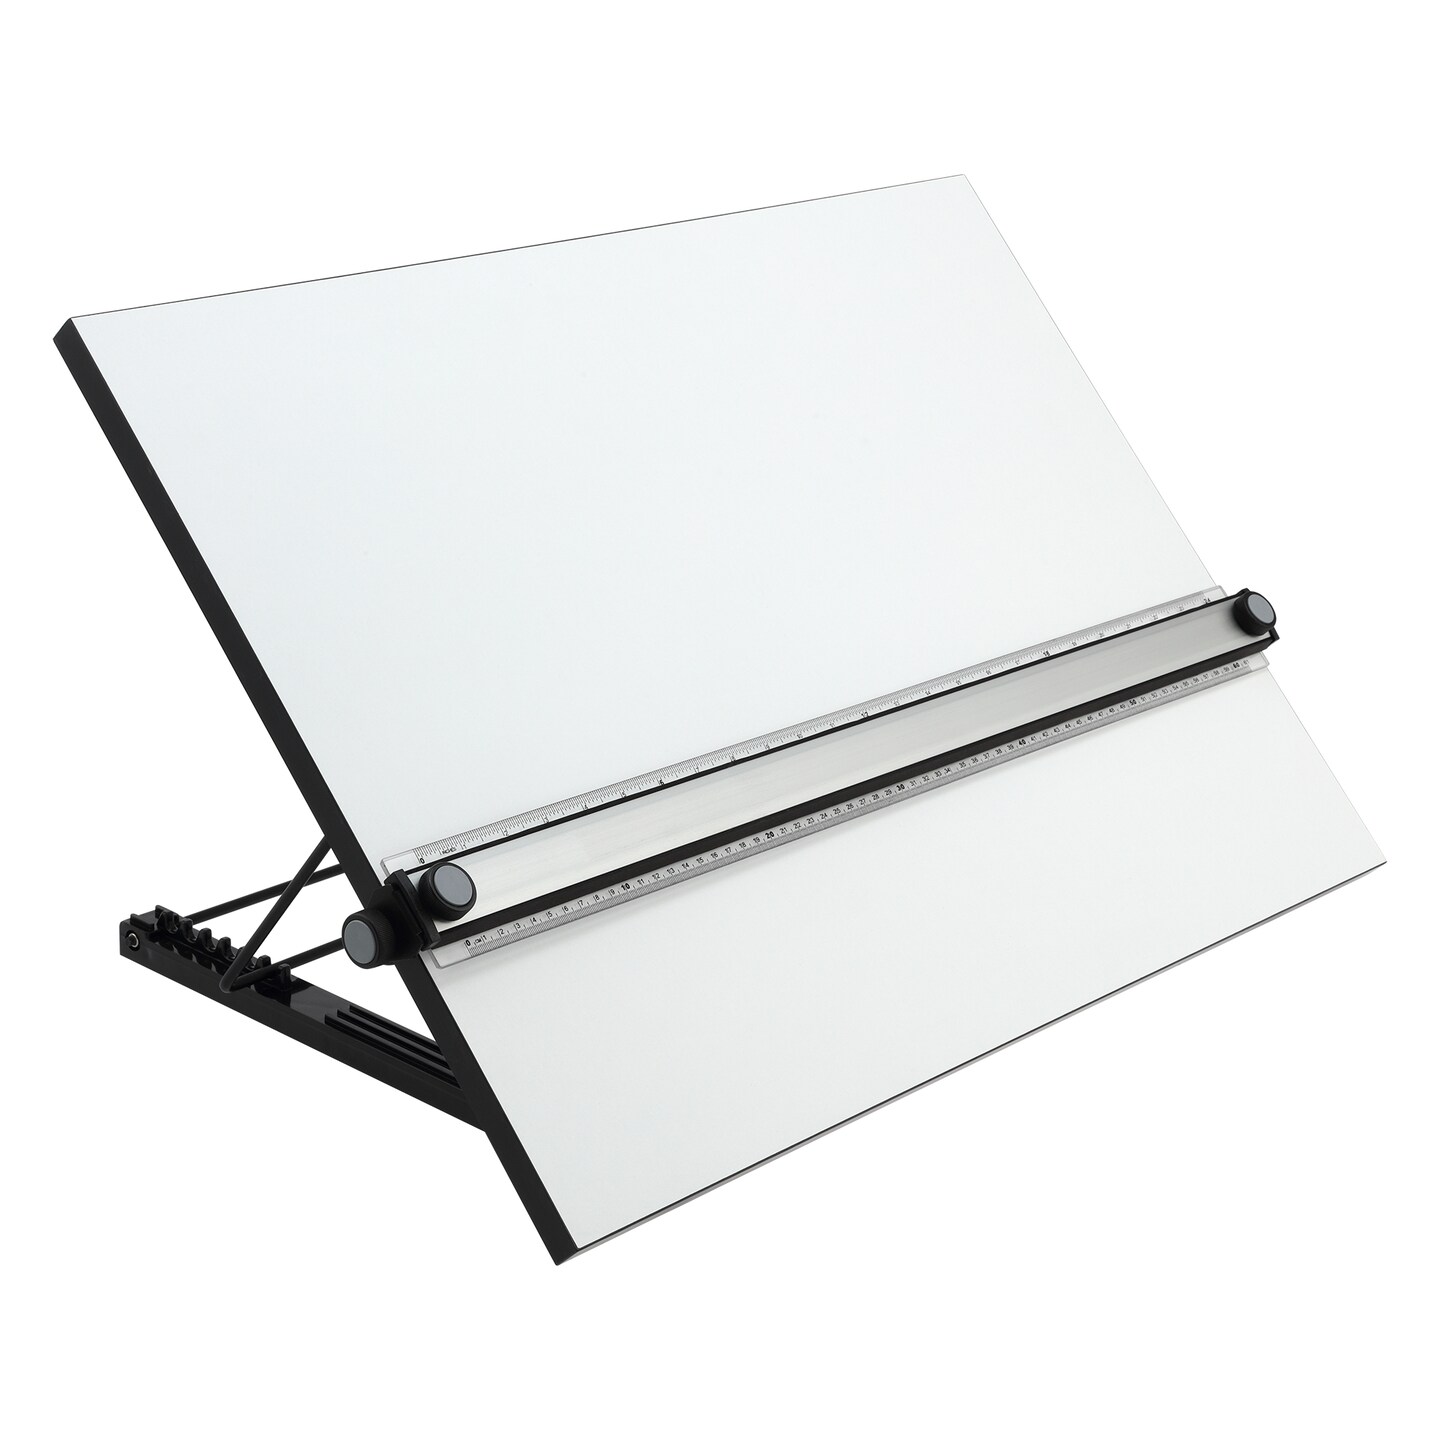 Acurit PXB Drawing Boards for Artists and Designers - Portable